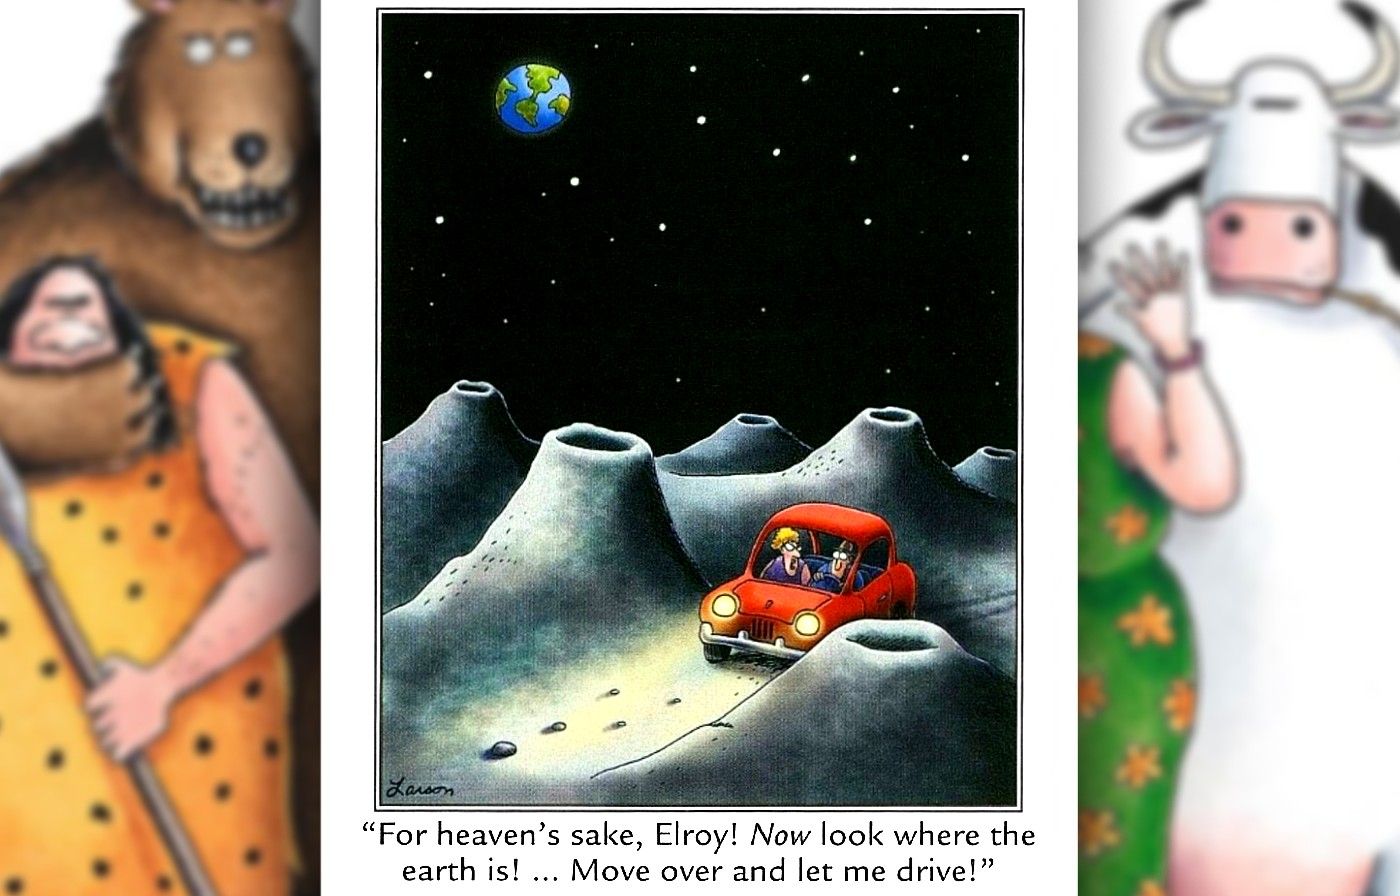 the far side comic where a couple quarrel because they're so lost, they've ended up driving on the moon